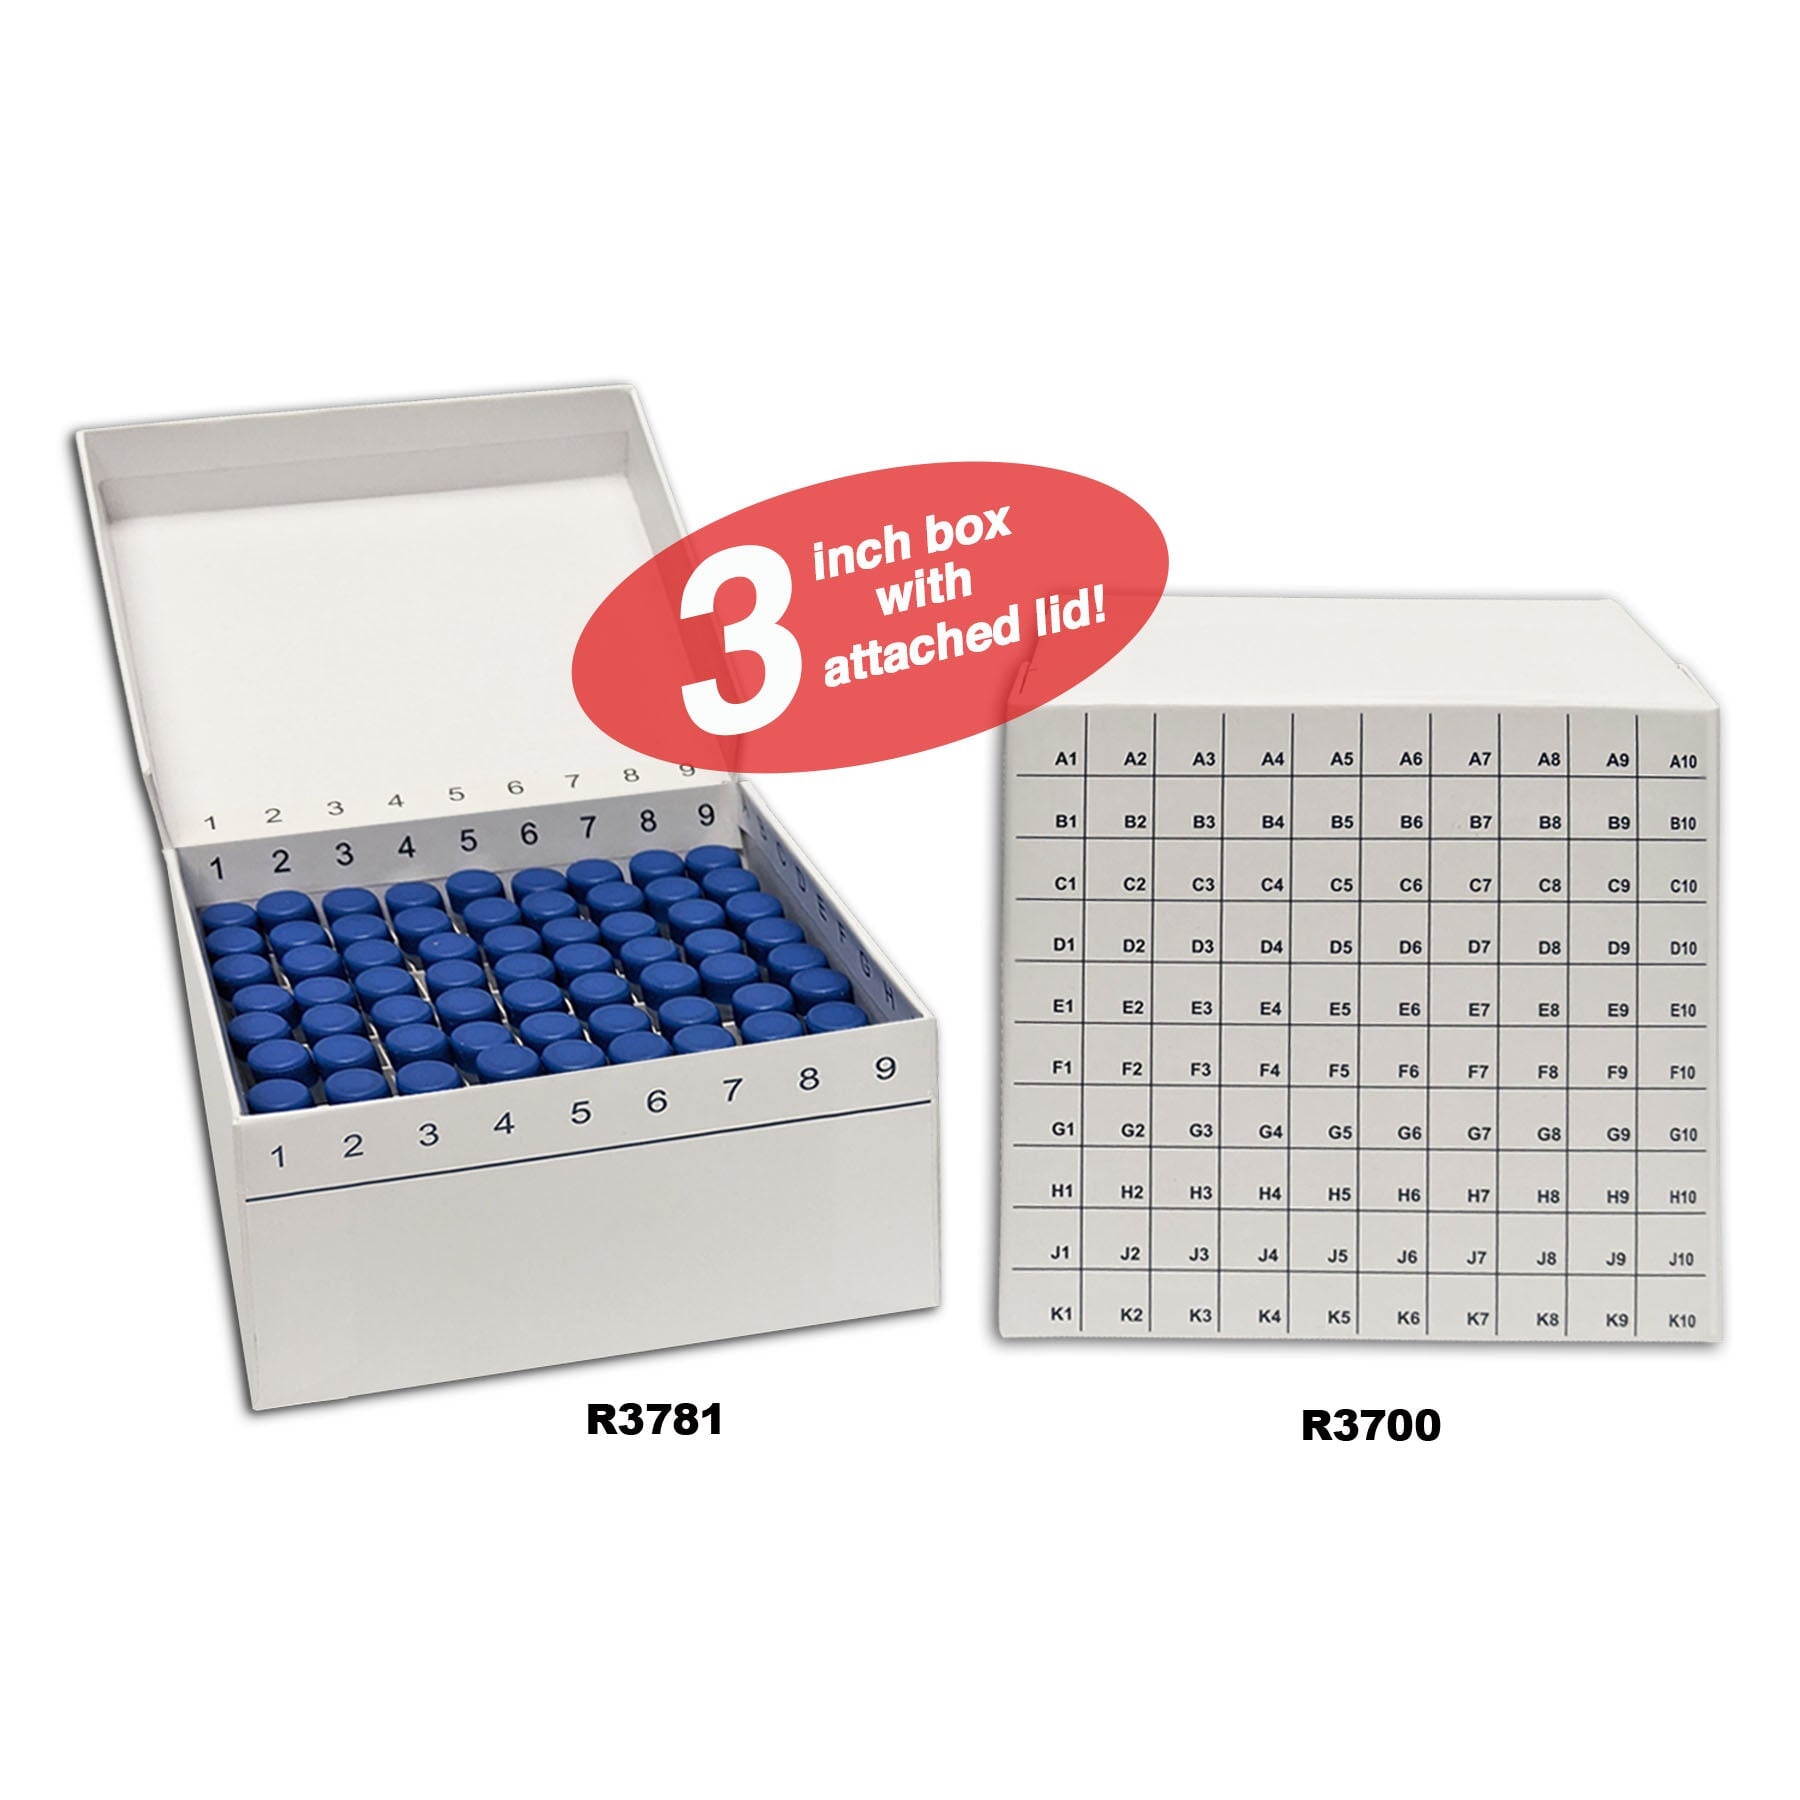 MTC Bio R3700 FlipTop™ Carboard freezer box w/ attached hinged lid, 100-place, white, 50/cs